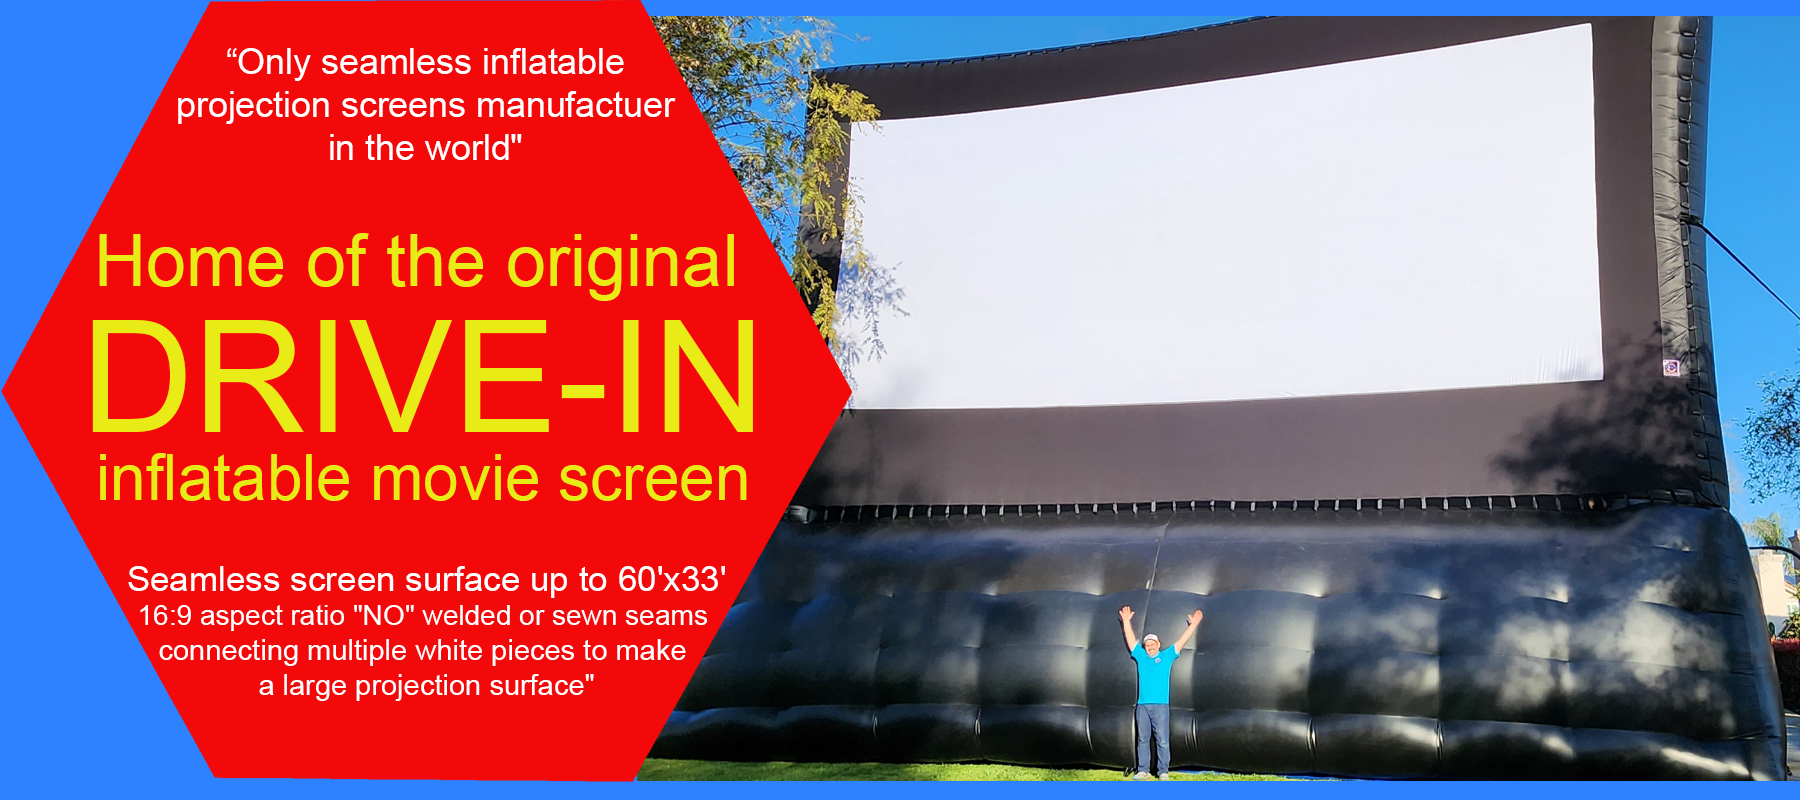 Giant seamless drive-in inflatable movie screens made in the USA